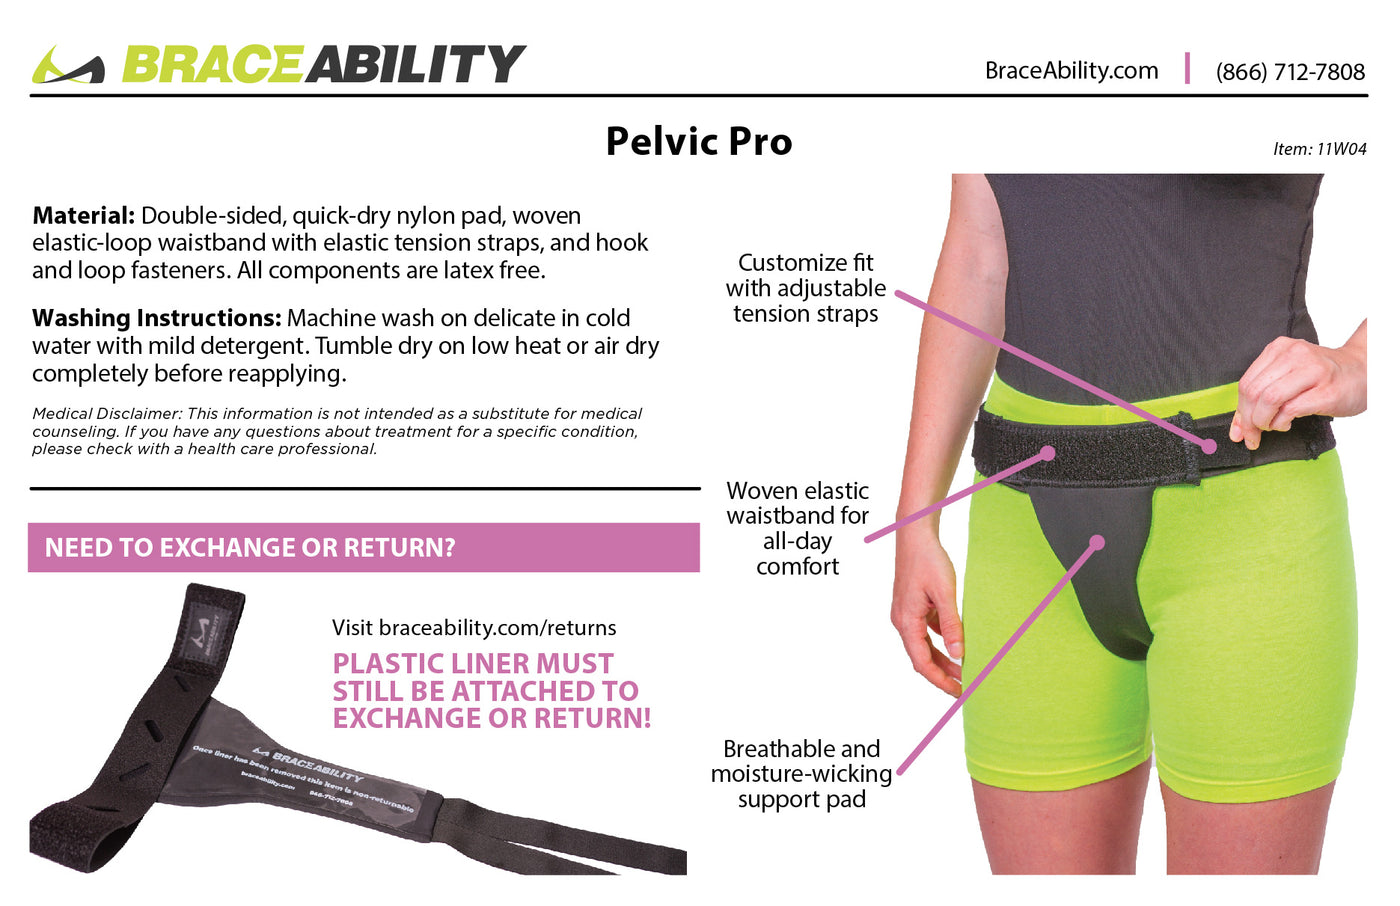 the pelvic pro is machine washable. Use cold water and run on a delicate cycle